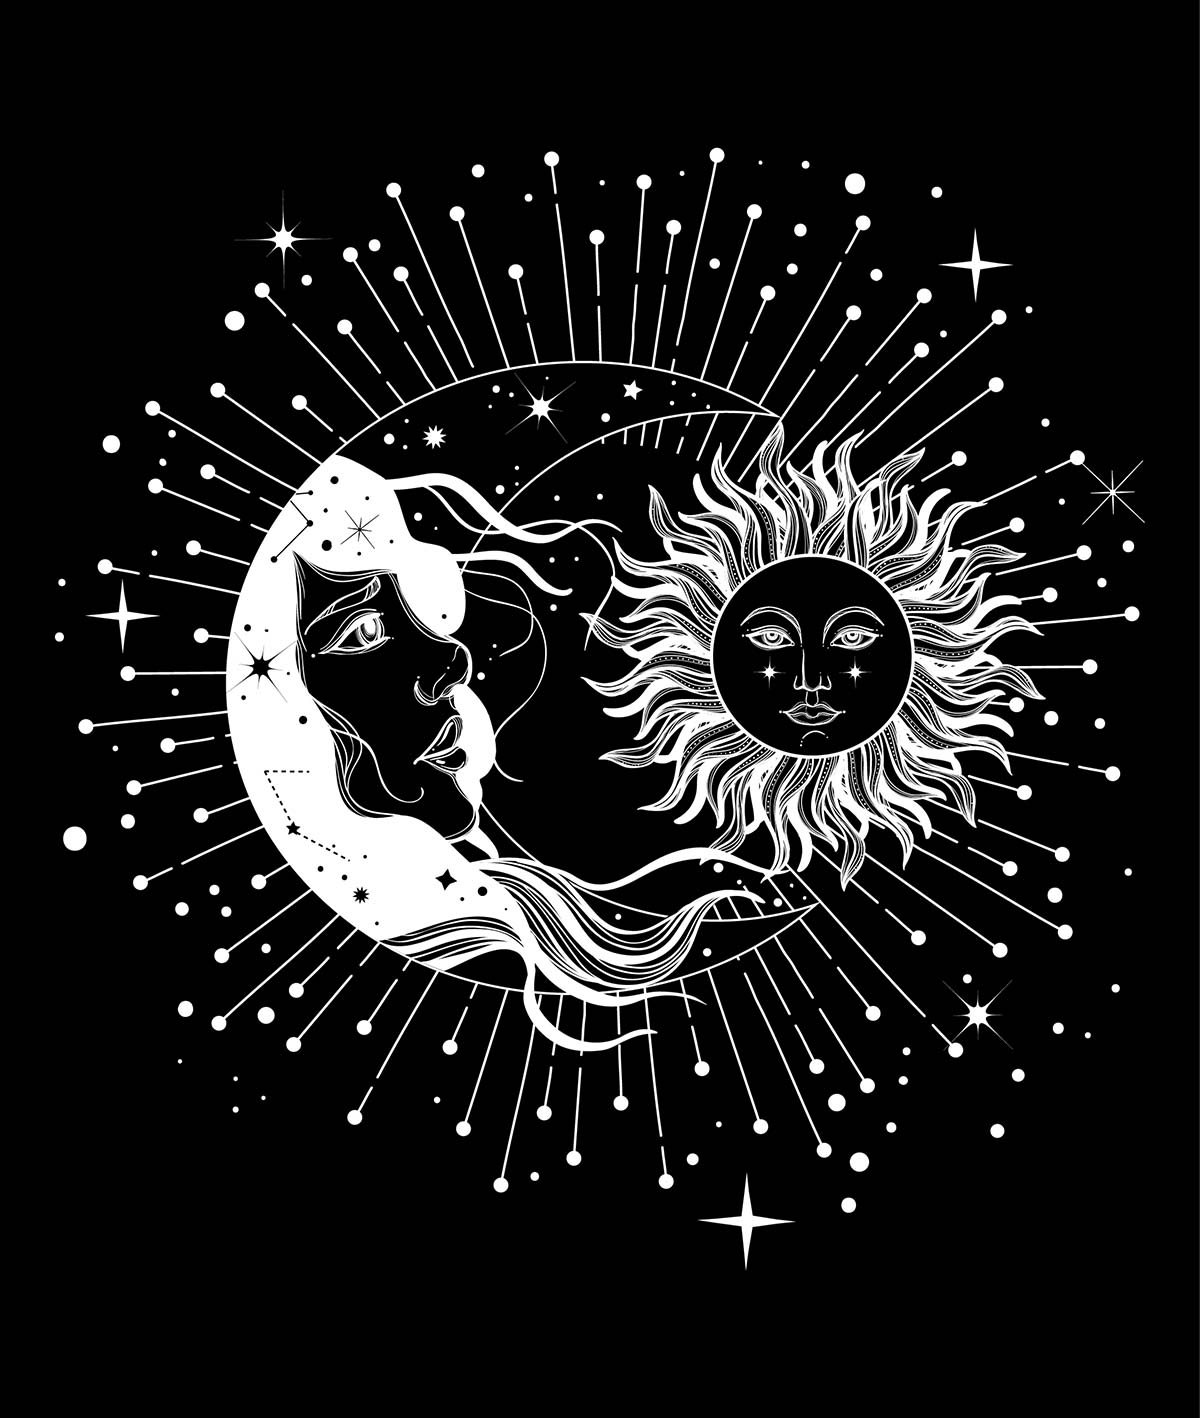 A sun and moon with stars